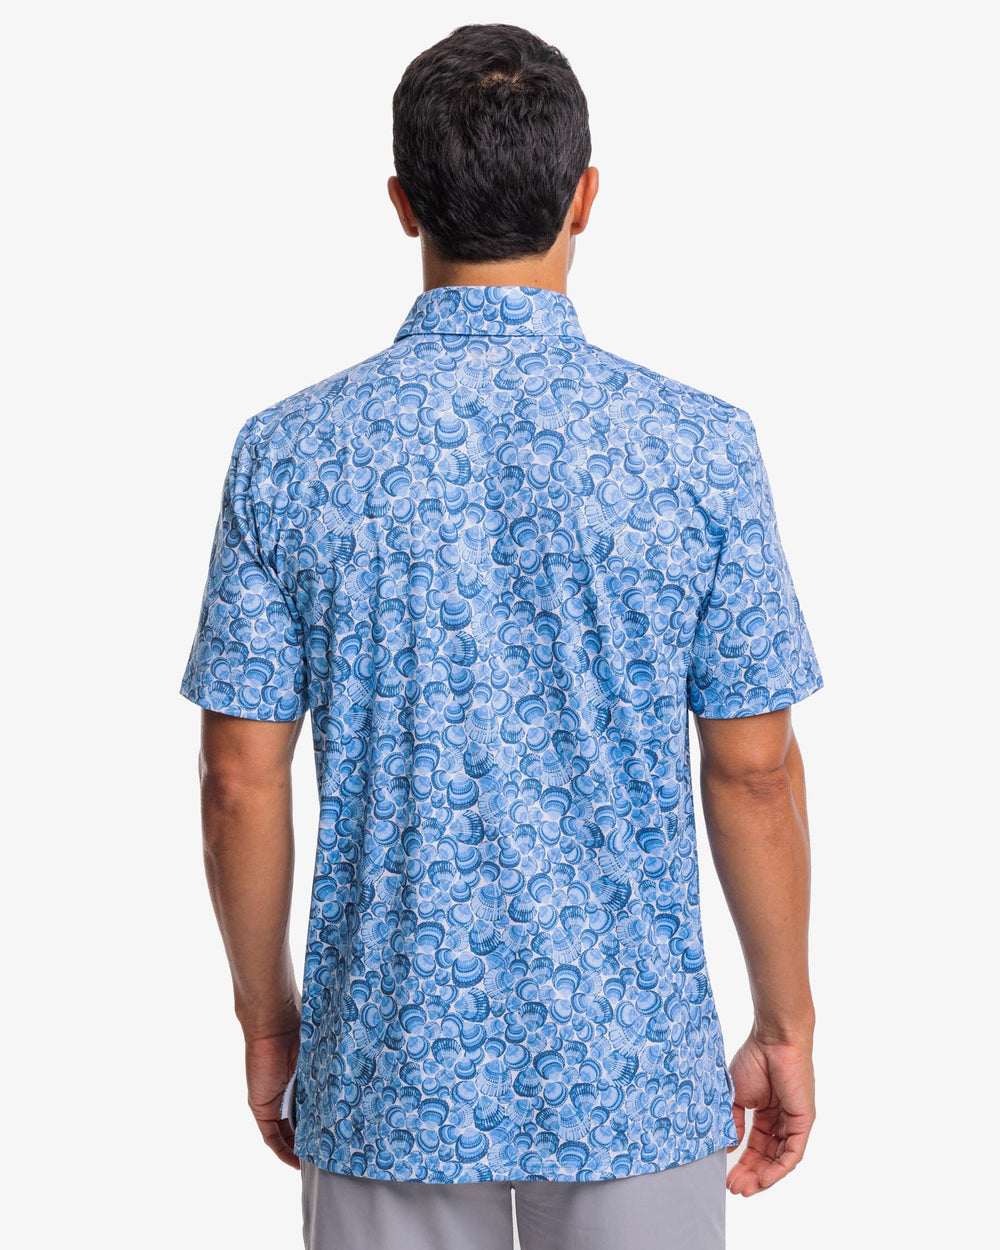 The back view of the Southern Tide Driver Sunday Shellies Performance Polo Shirt by Southern Tide - Classic White